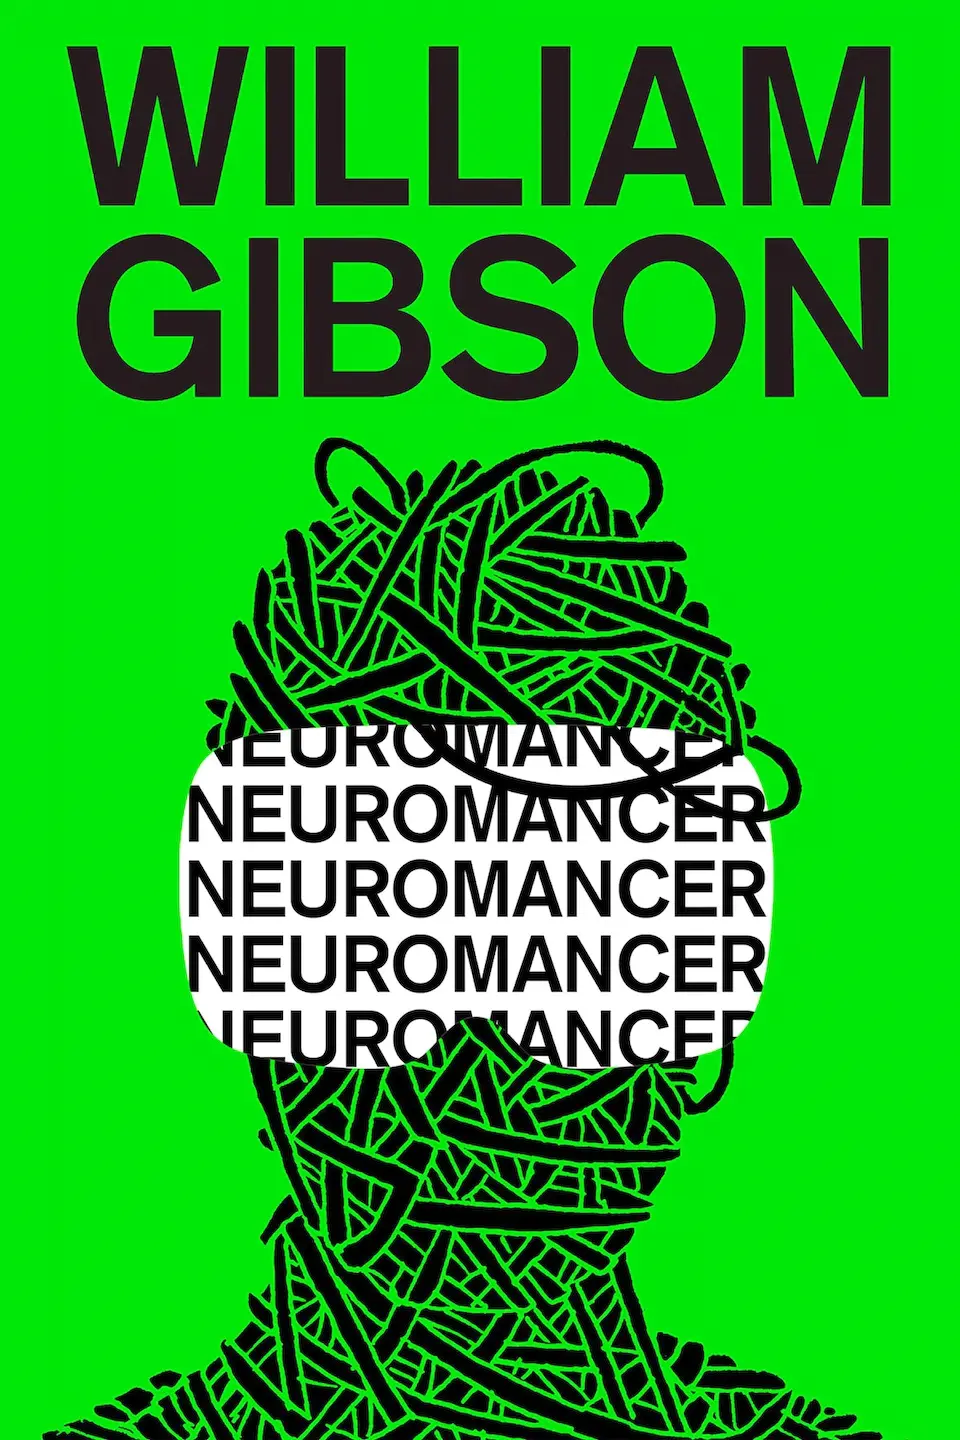 Neuromancer by William Gibson finished on 2022 May 29